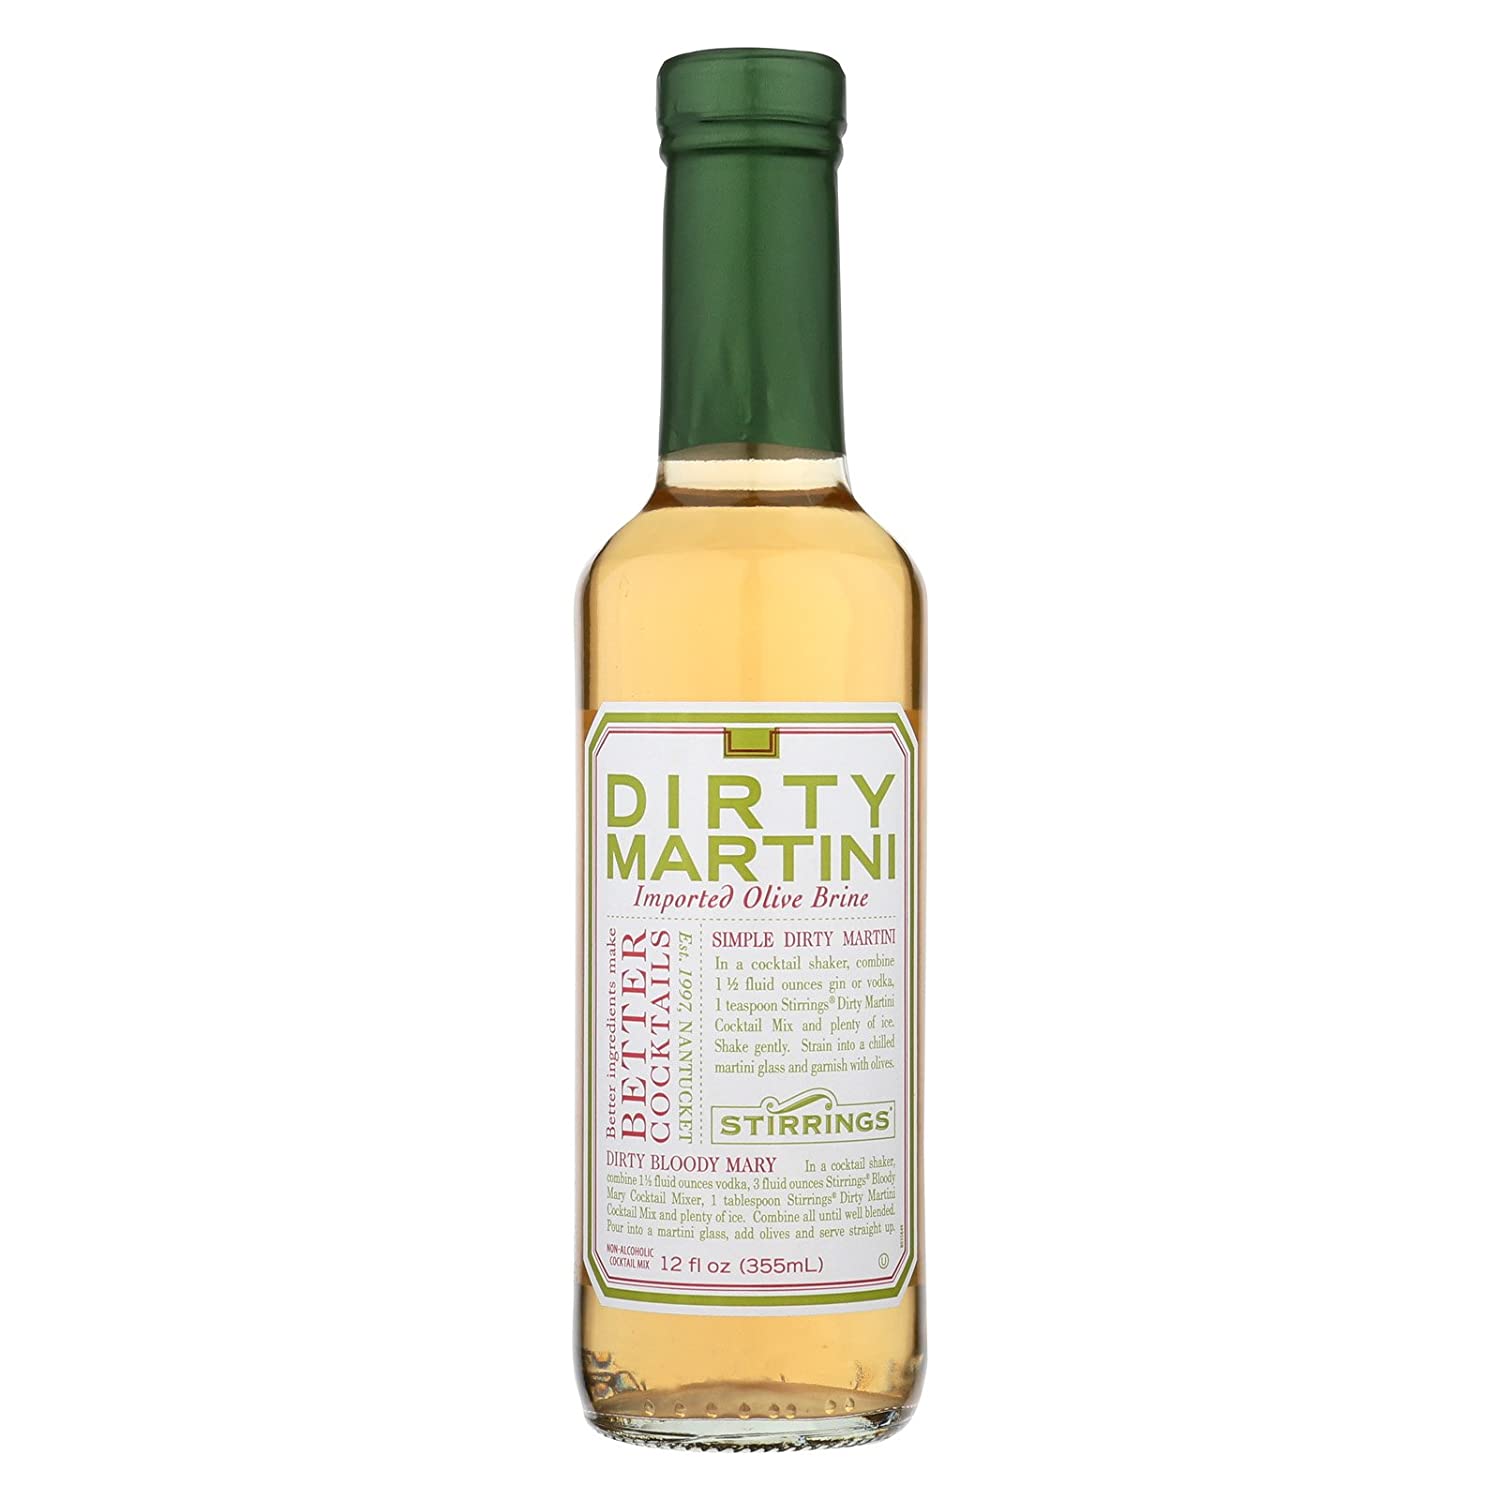 Stirrings All Natural Dirty Martini Cocktail Mixer